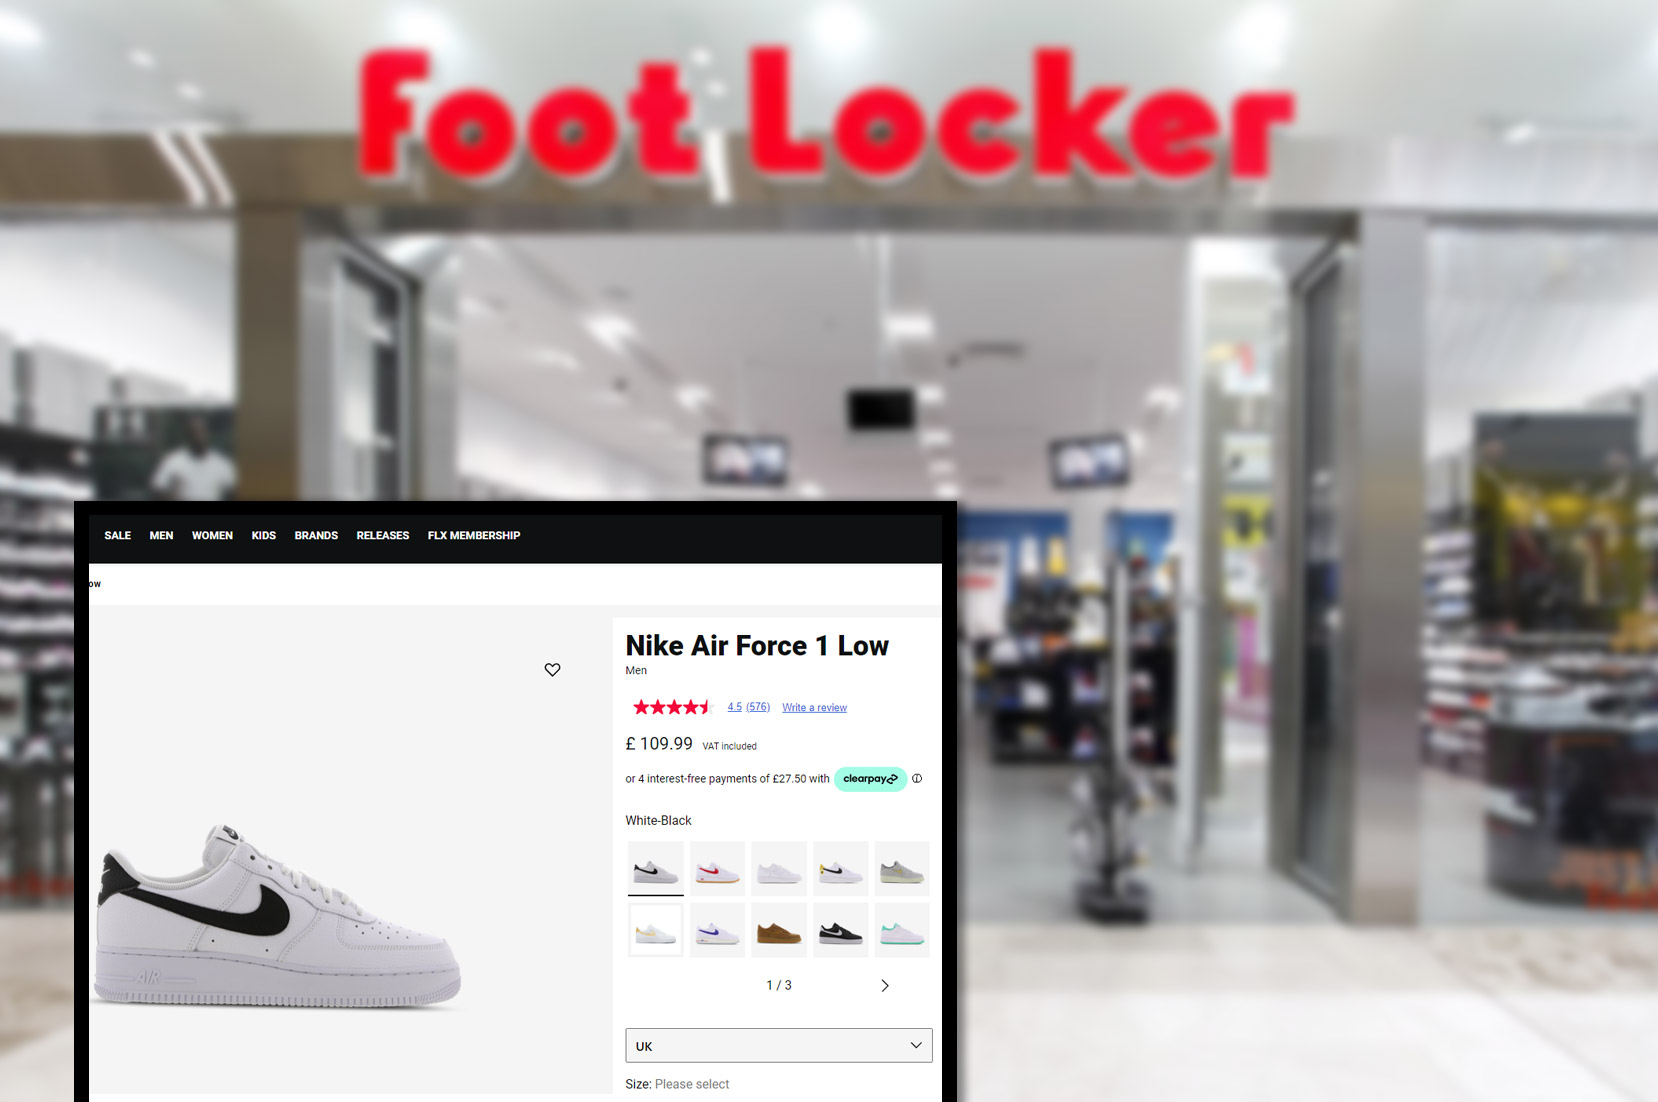 footlocker-co-ukproduct-pricing-information-and-image-scraping-services